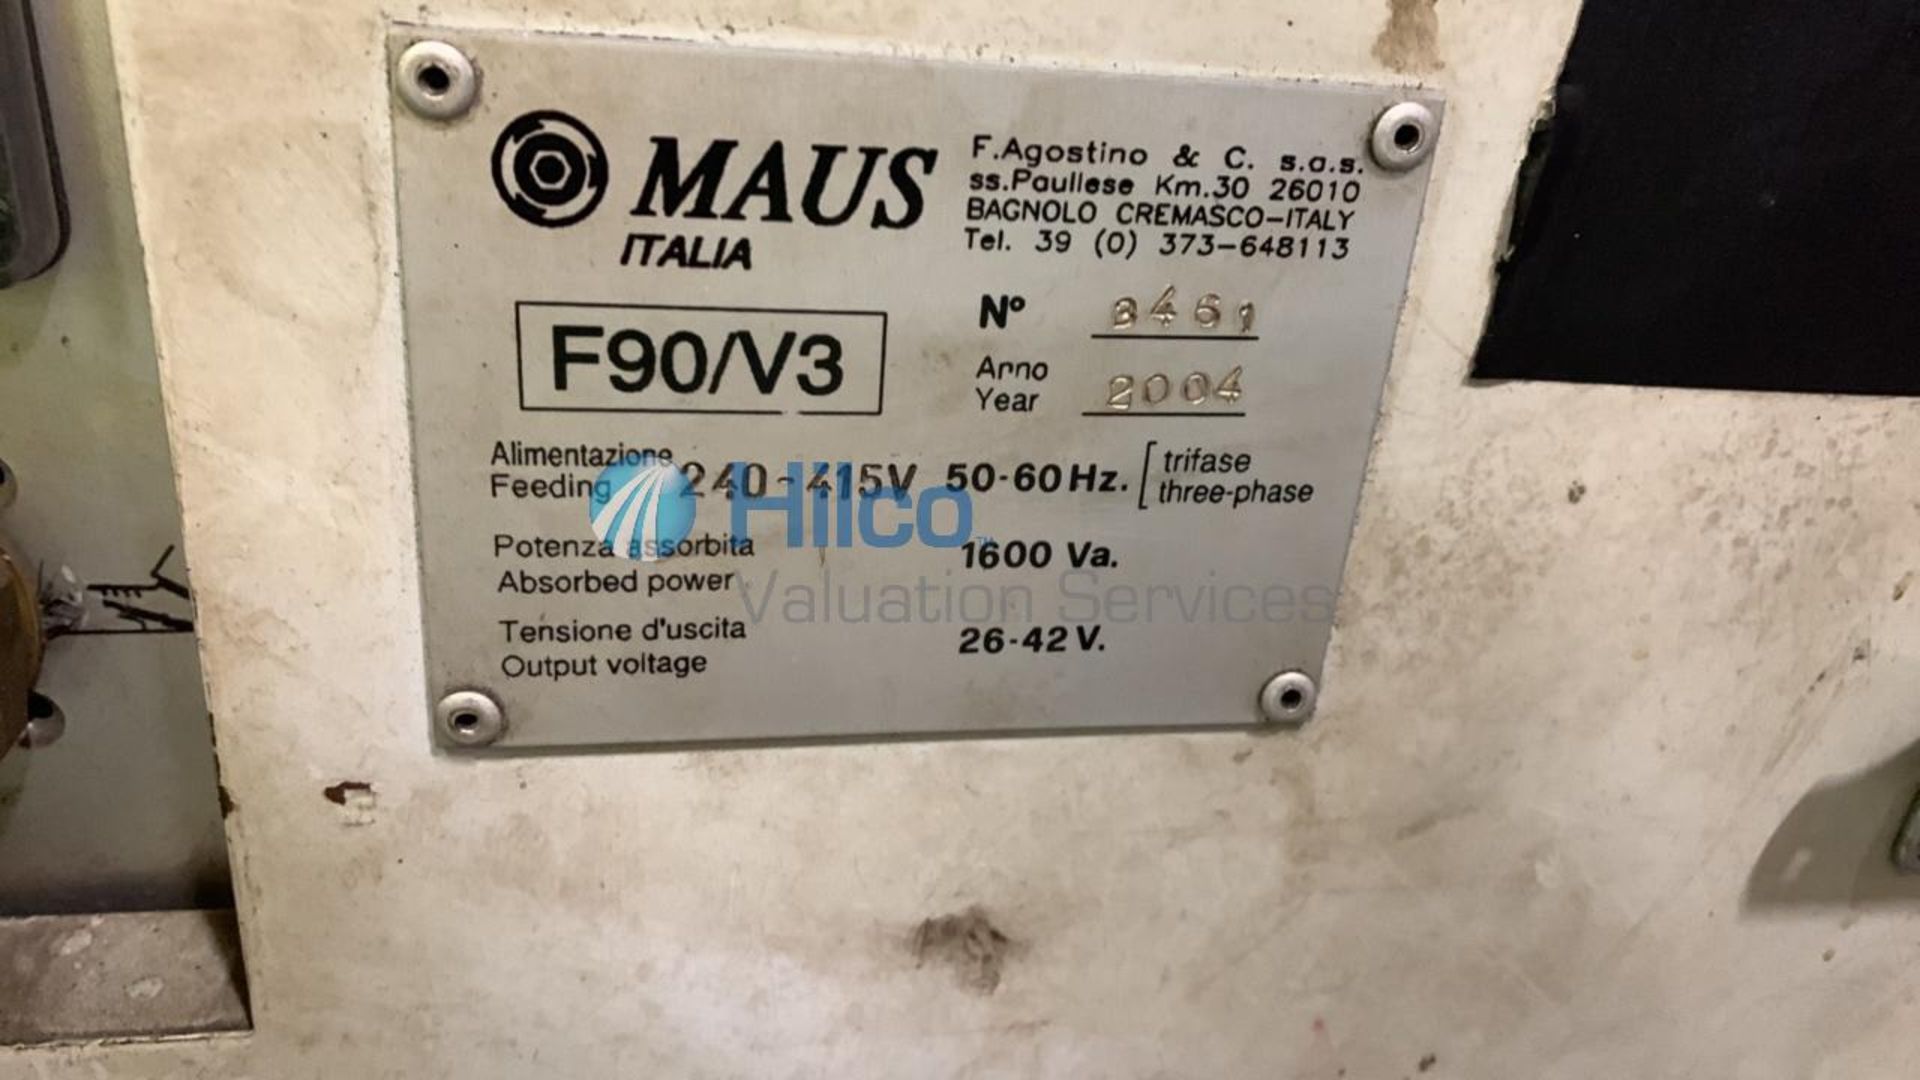 Maus M4-Mobile Rolling Motor, Serial No. 151027 (2019) with Maus F90/V3 Controller Serial No 3461 (2 - Image 4 of 5